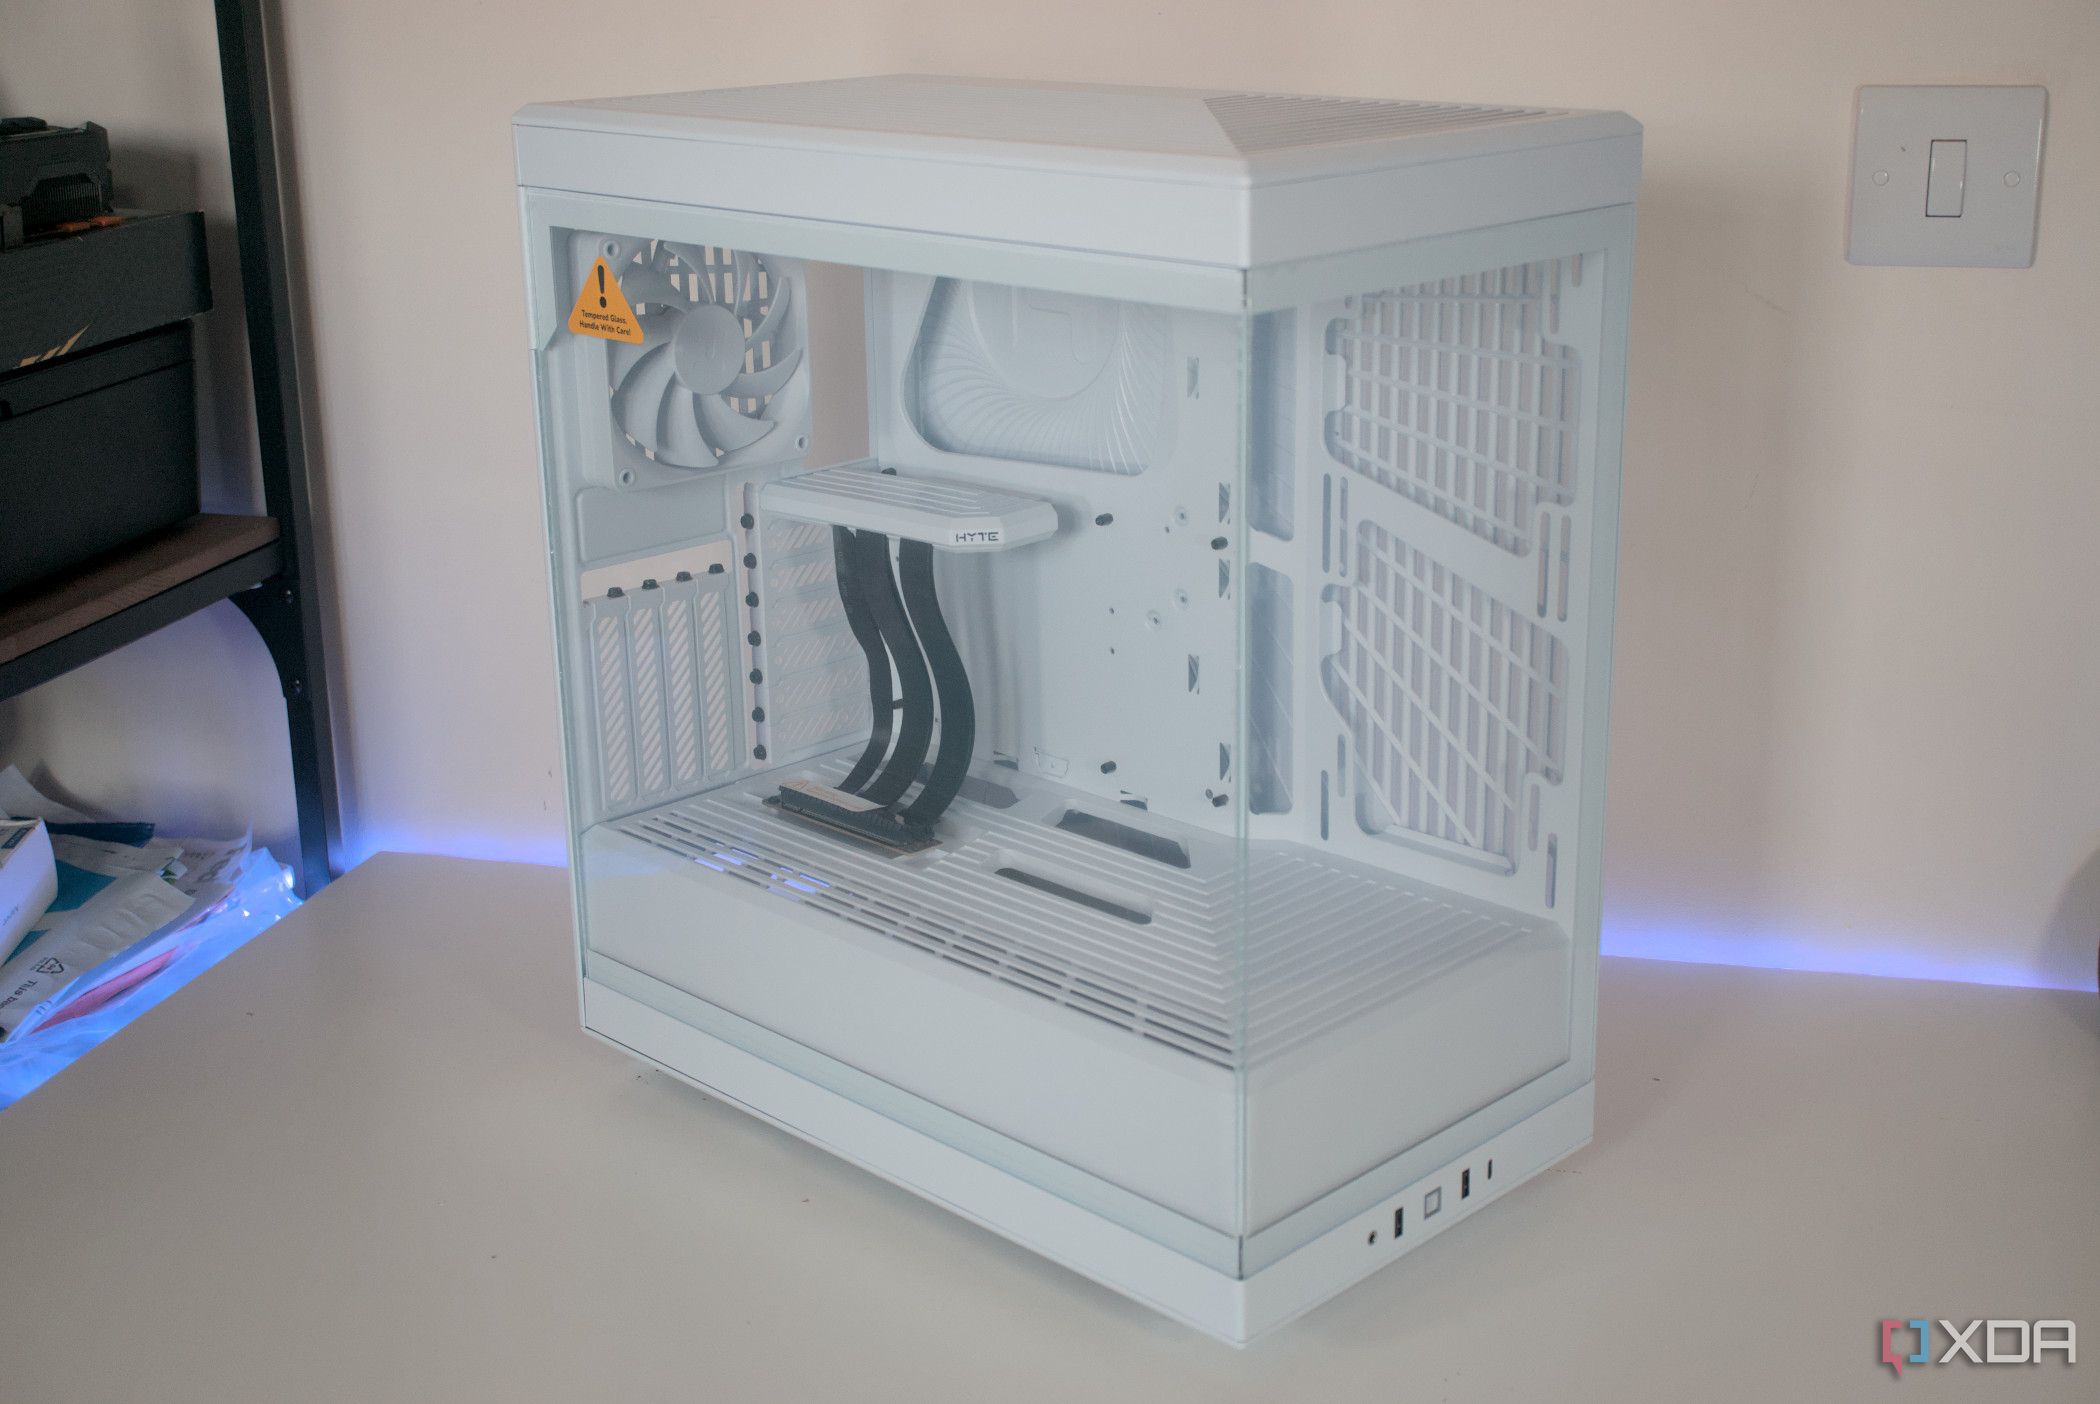 HYTE Y40 Snow White Edition PC case review: Hot looks with even